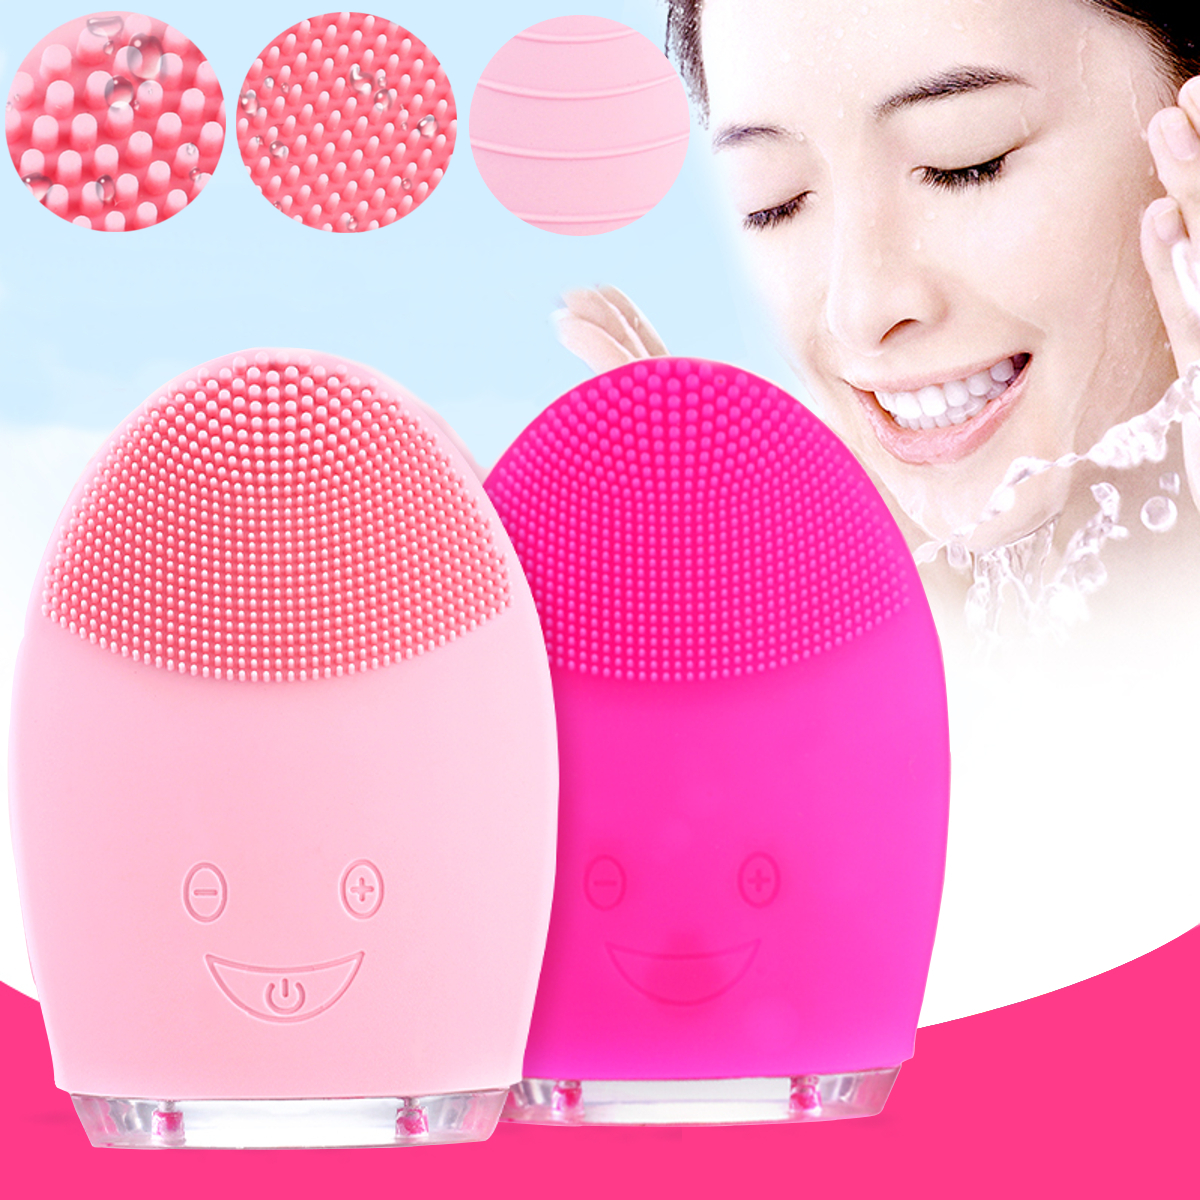 Rechargeable Facial Cleansing Brush Face Skin Massager